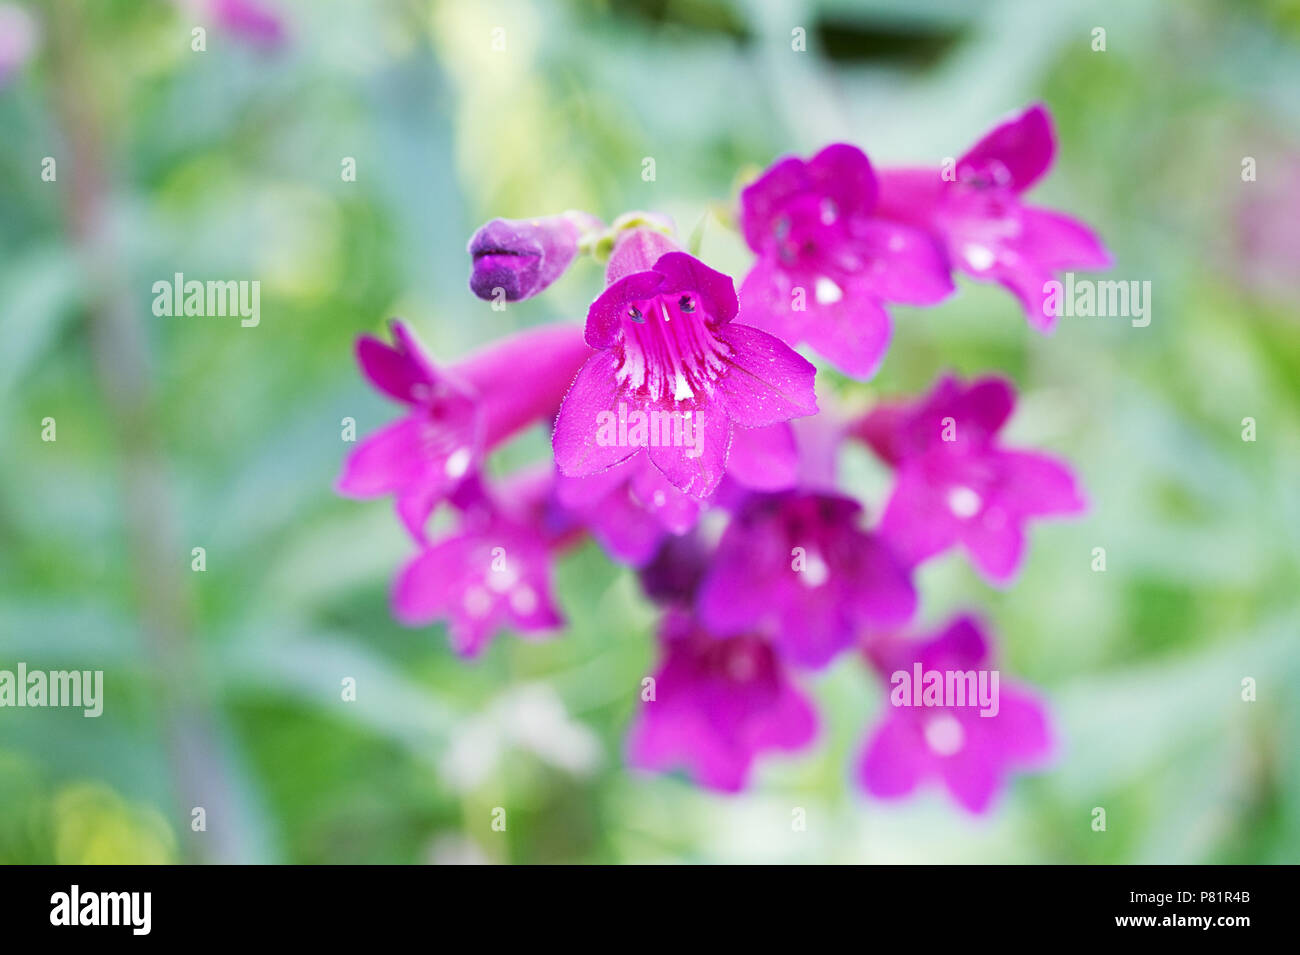 Penstemon 'Sour Grapes' growing in an herbaceous border. Beard tongue flower. Stock Photo